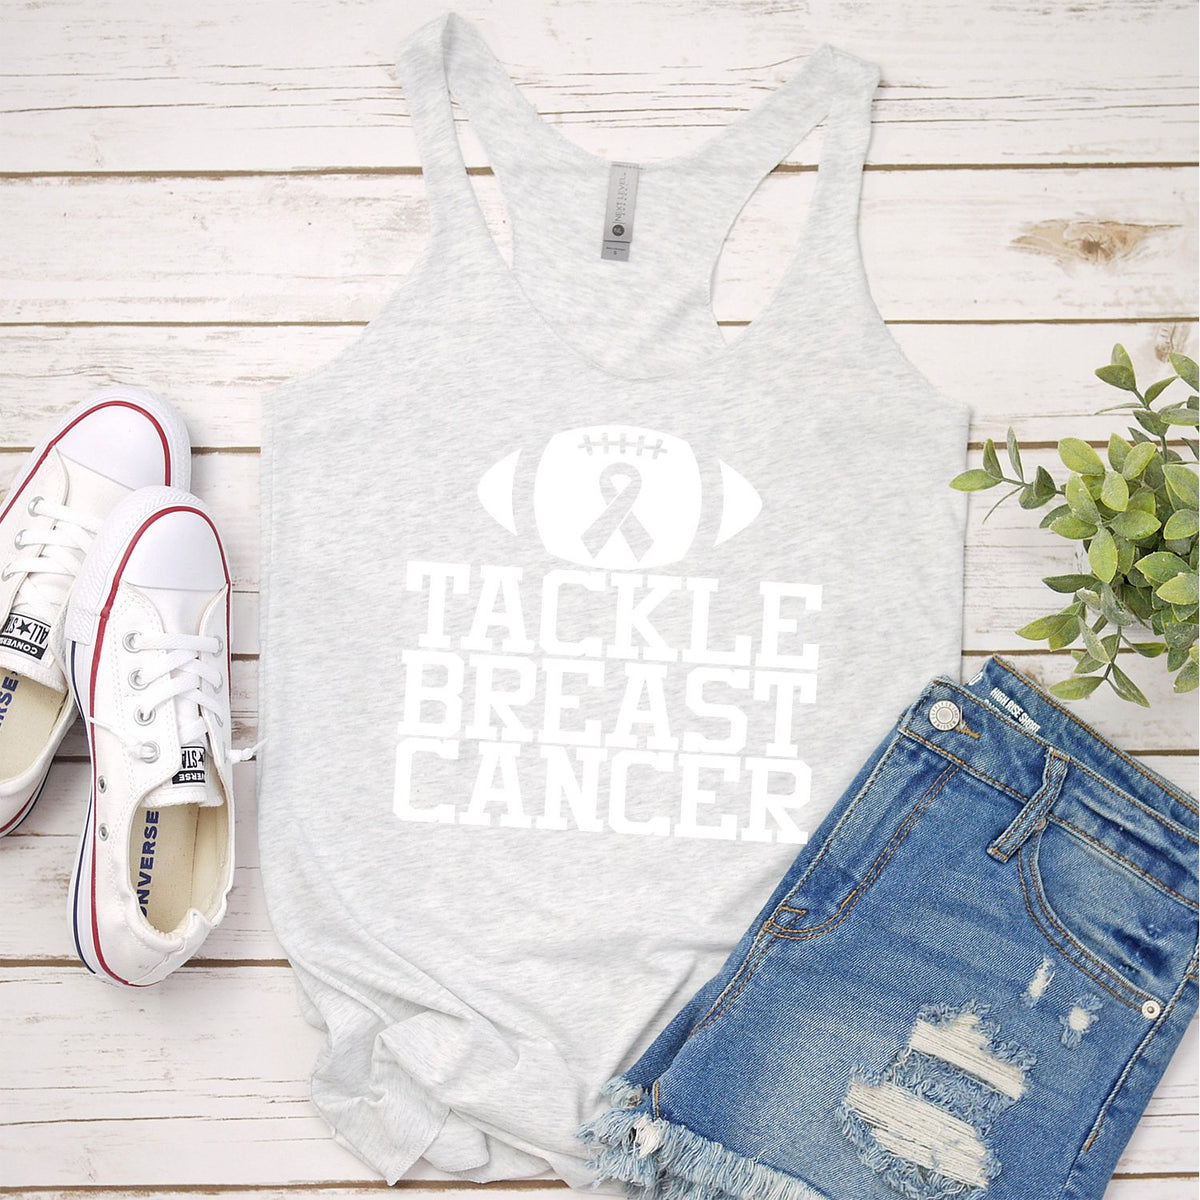 Tackle Breast Cancer - Tank Top Racerback